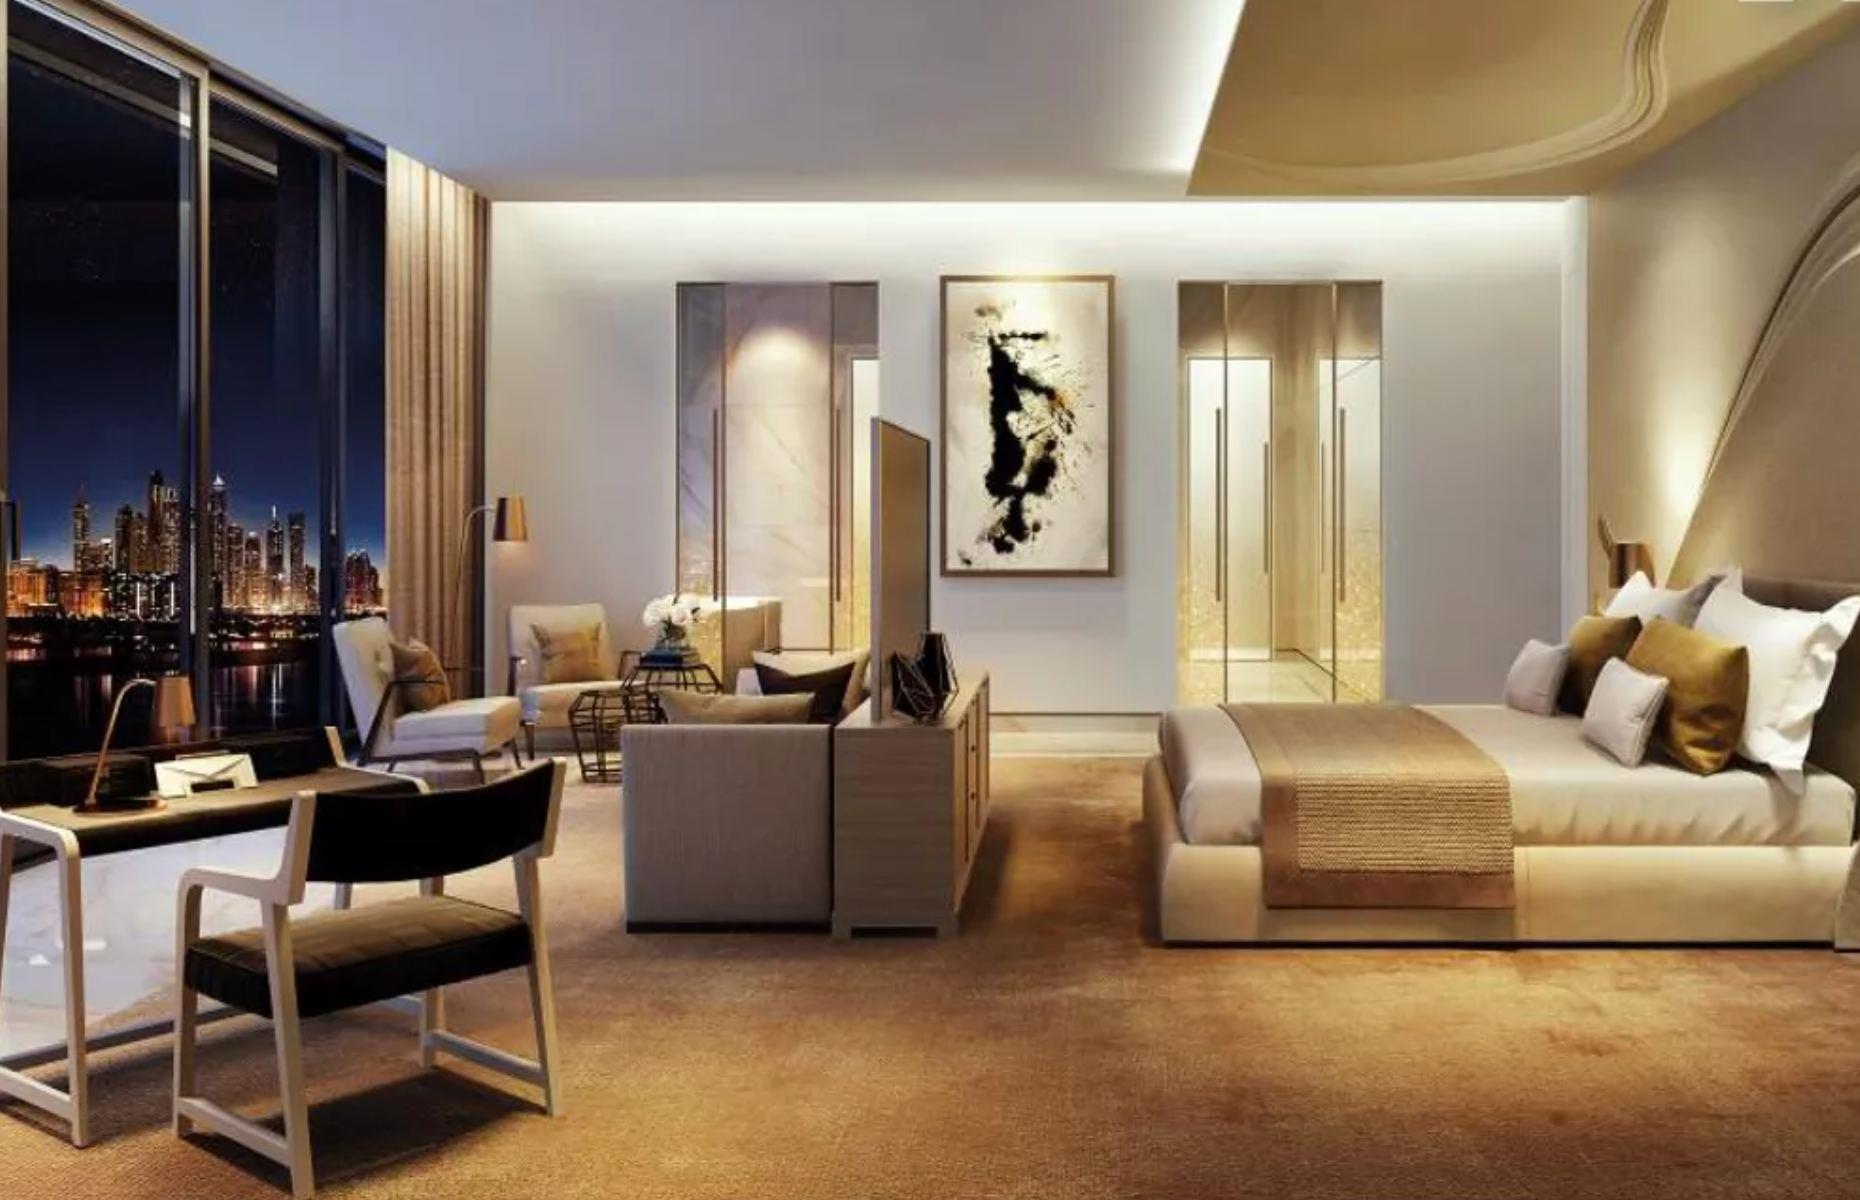 <p>While the apartment was offered unfinished, the new owner has the option to choose from a range of interior designs conceived by renowned interior designer Sybille de Margerie, a member of the Taittinger family, who transformed the Mandarin Oriental in Paris. Her use of calm, subtle tones of gold and white complement the sea views and are accented by personally curated artworks, including tapestries and intricately woven screens. </p>